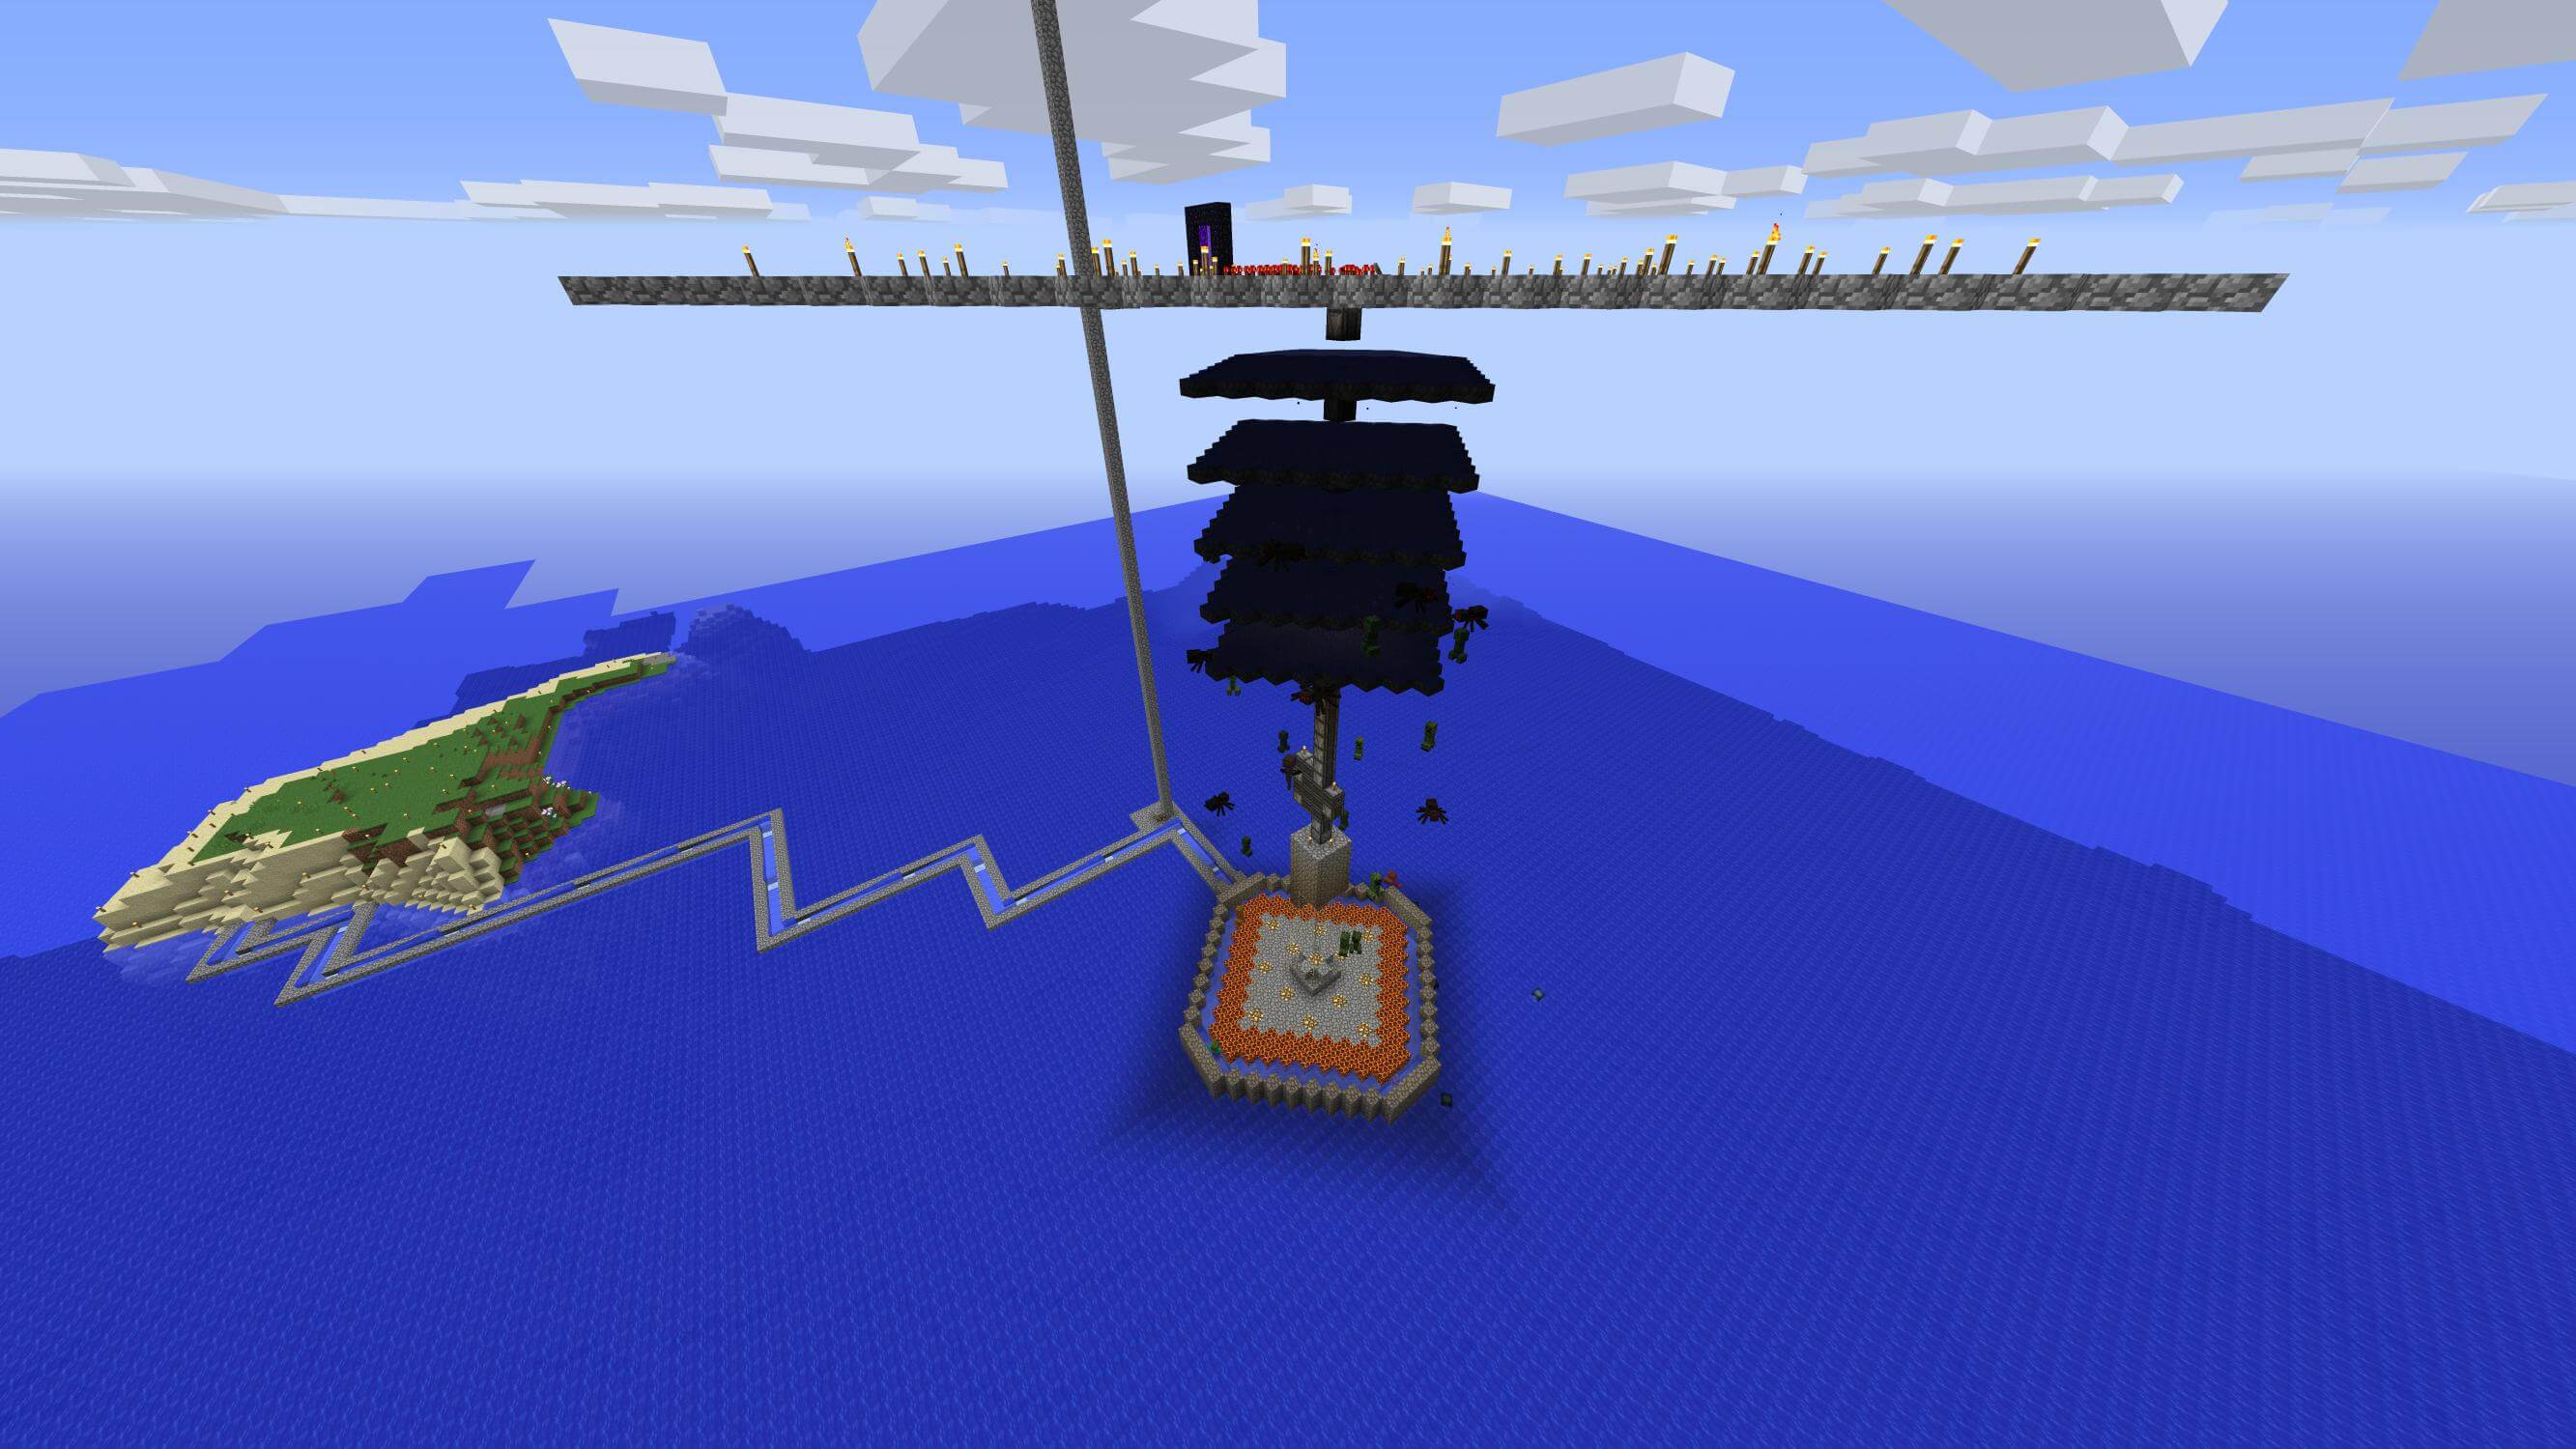 An image taken looking at a mob farm with multiple platforms above an ocean.